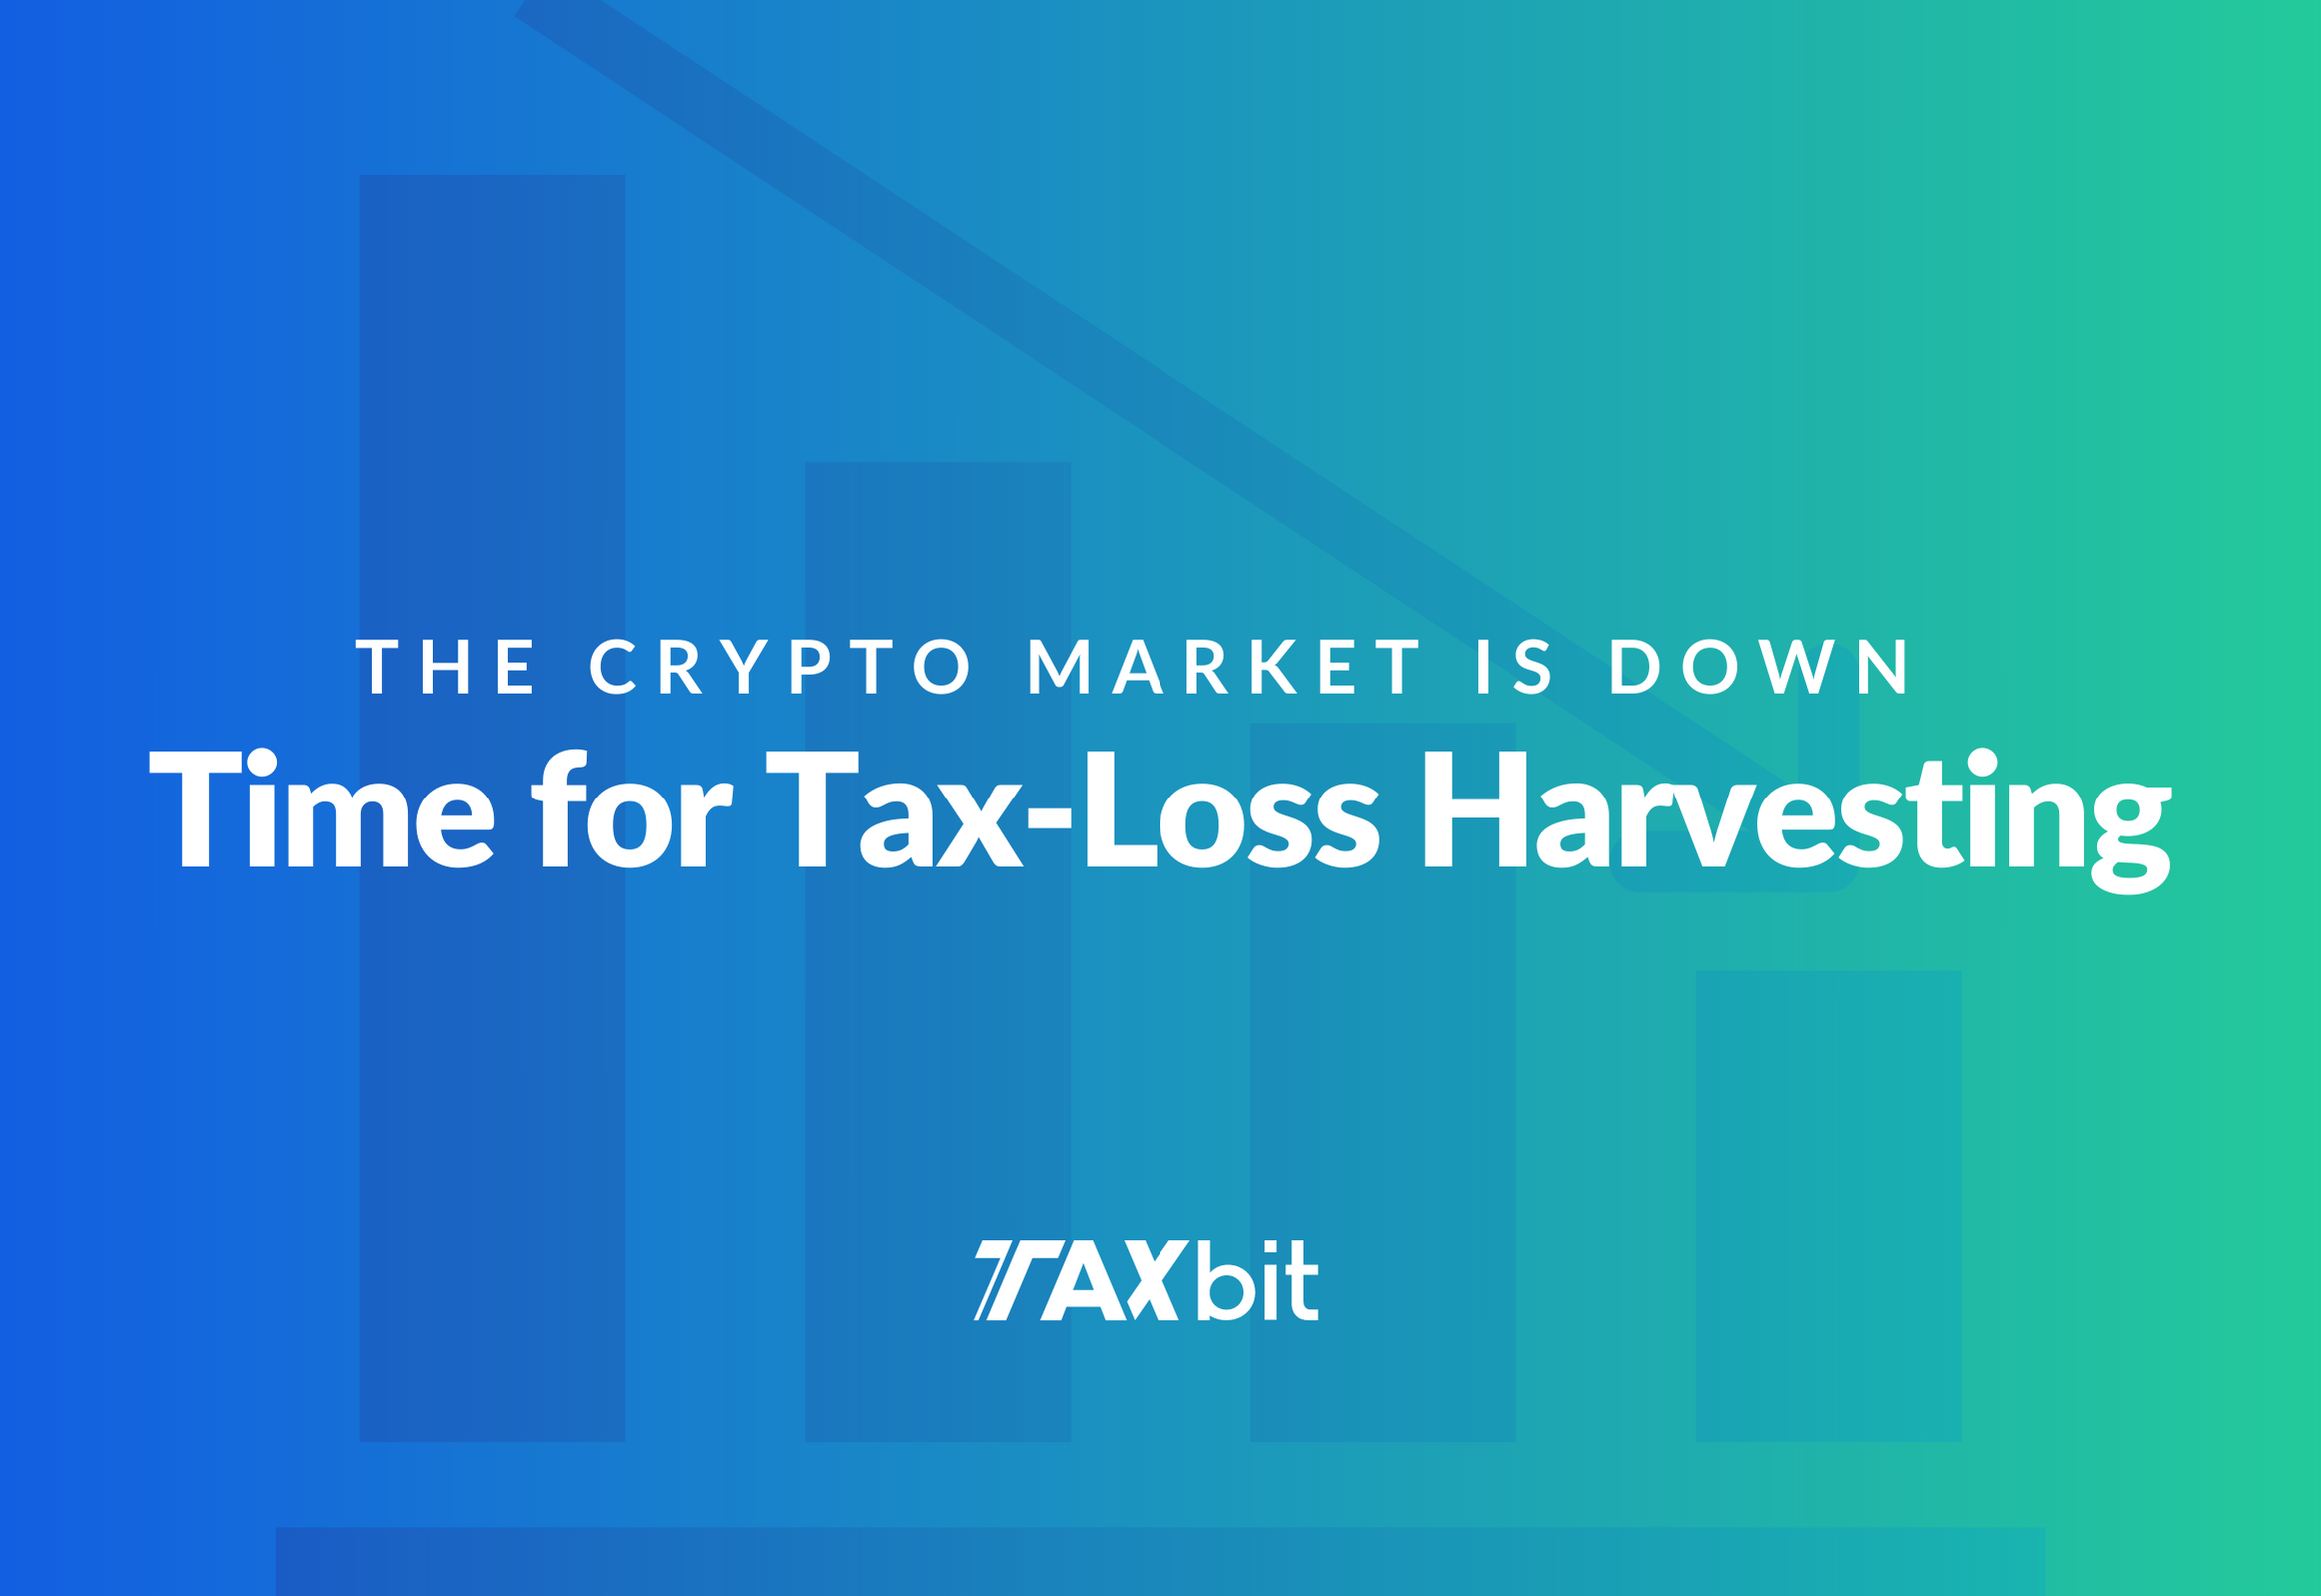 The Crypto Market Is Down—Time to Take Advantage of Tax-Loss ...